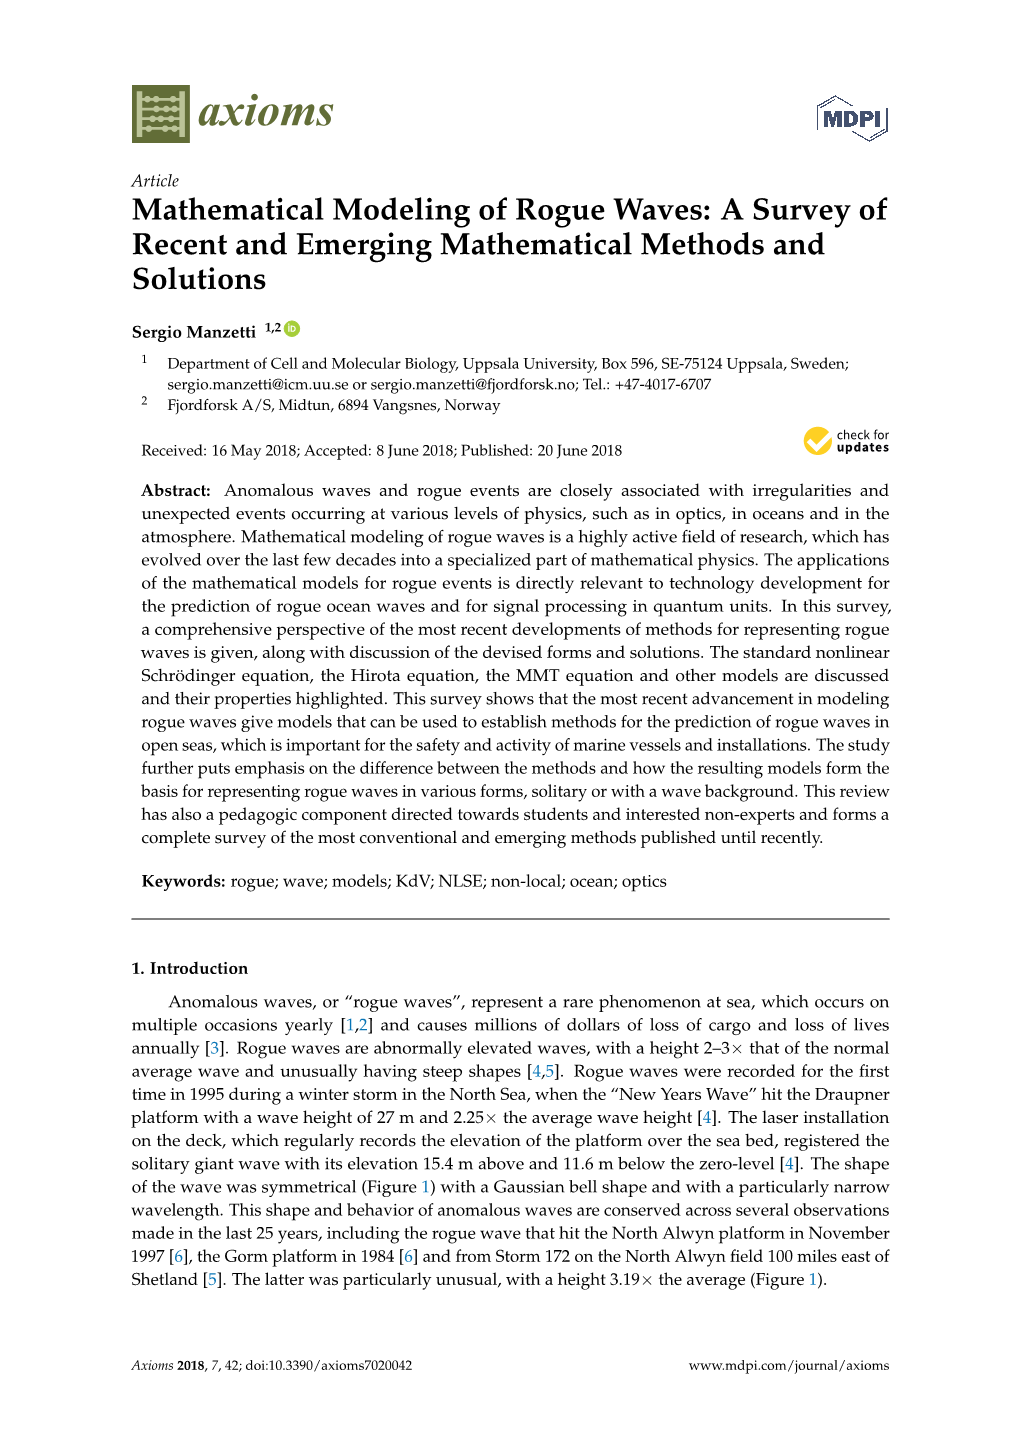 Mathematical Modeling of Rogue Waves: a Survey of Recent and Emerging Mathematical Methods and Solutions